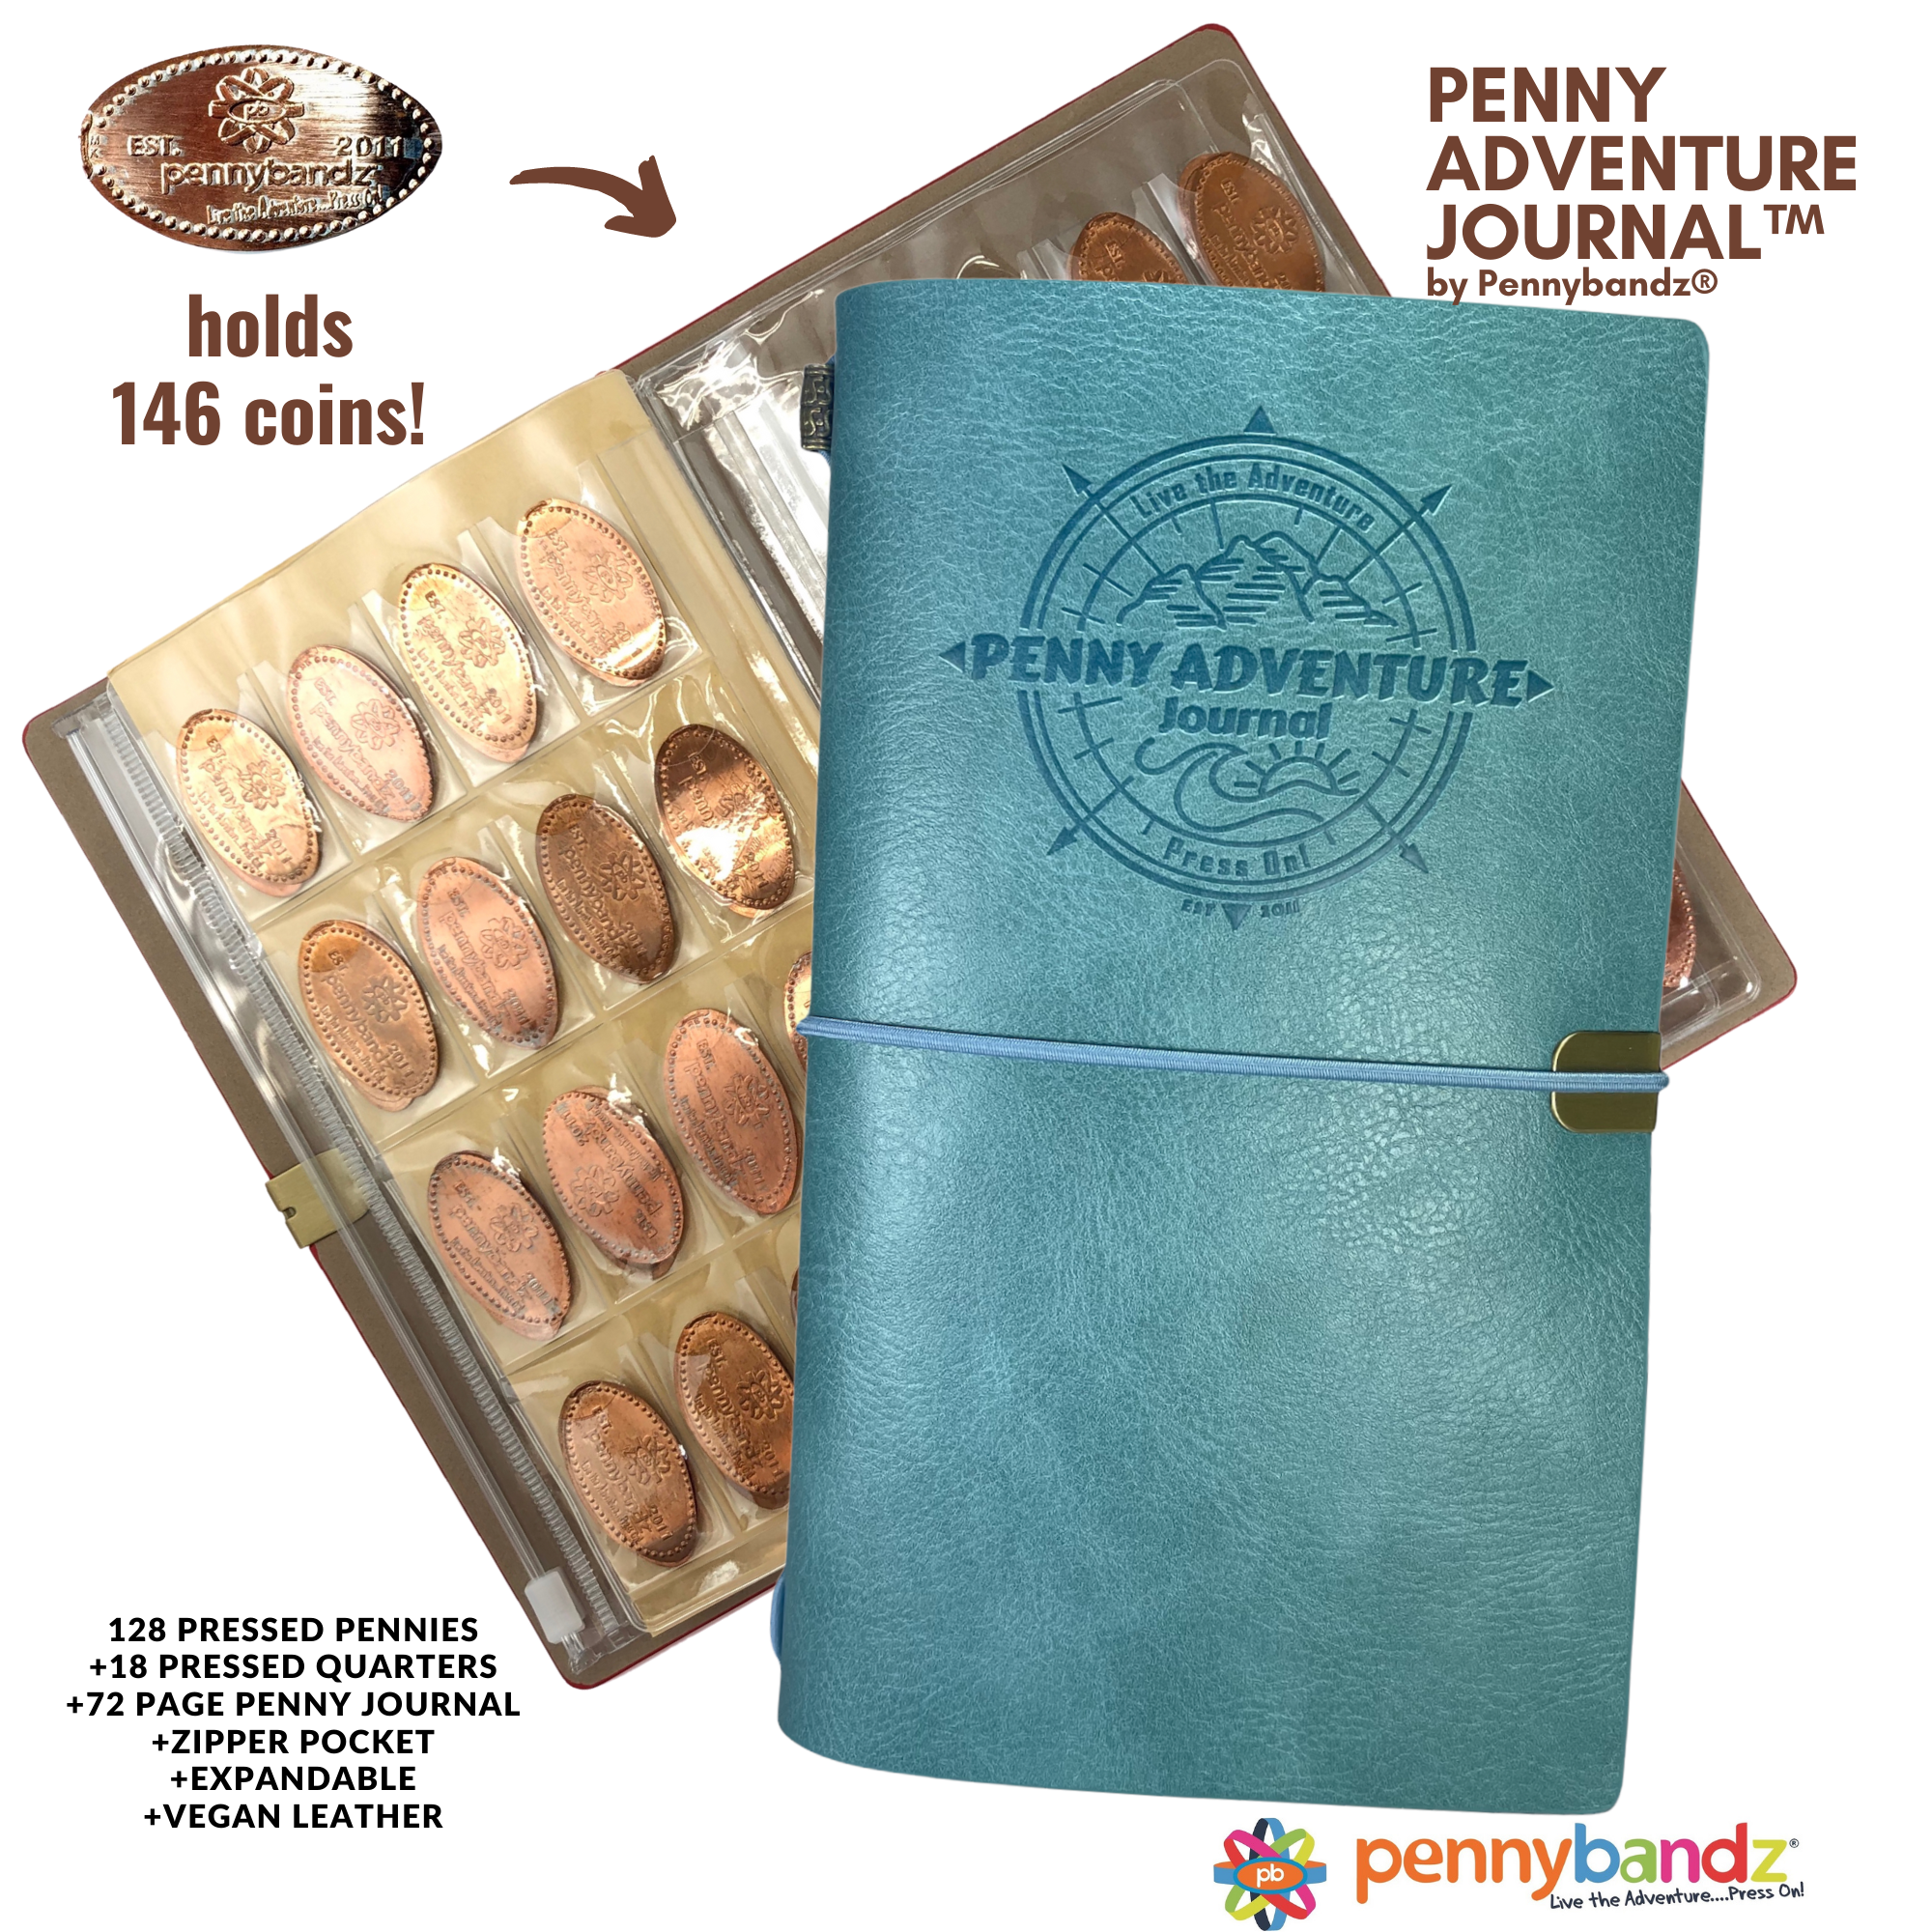 Pennybandz Penny Passport to My Penny Adventures - Souvenir Pressed Penny Passport Holds 48 Coins - Vegan Leather - Every Book Ordered Comes with A